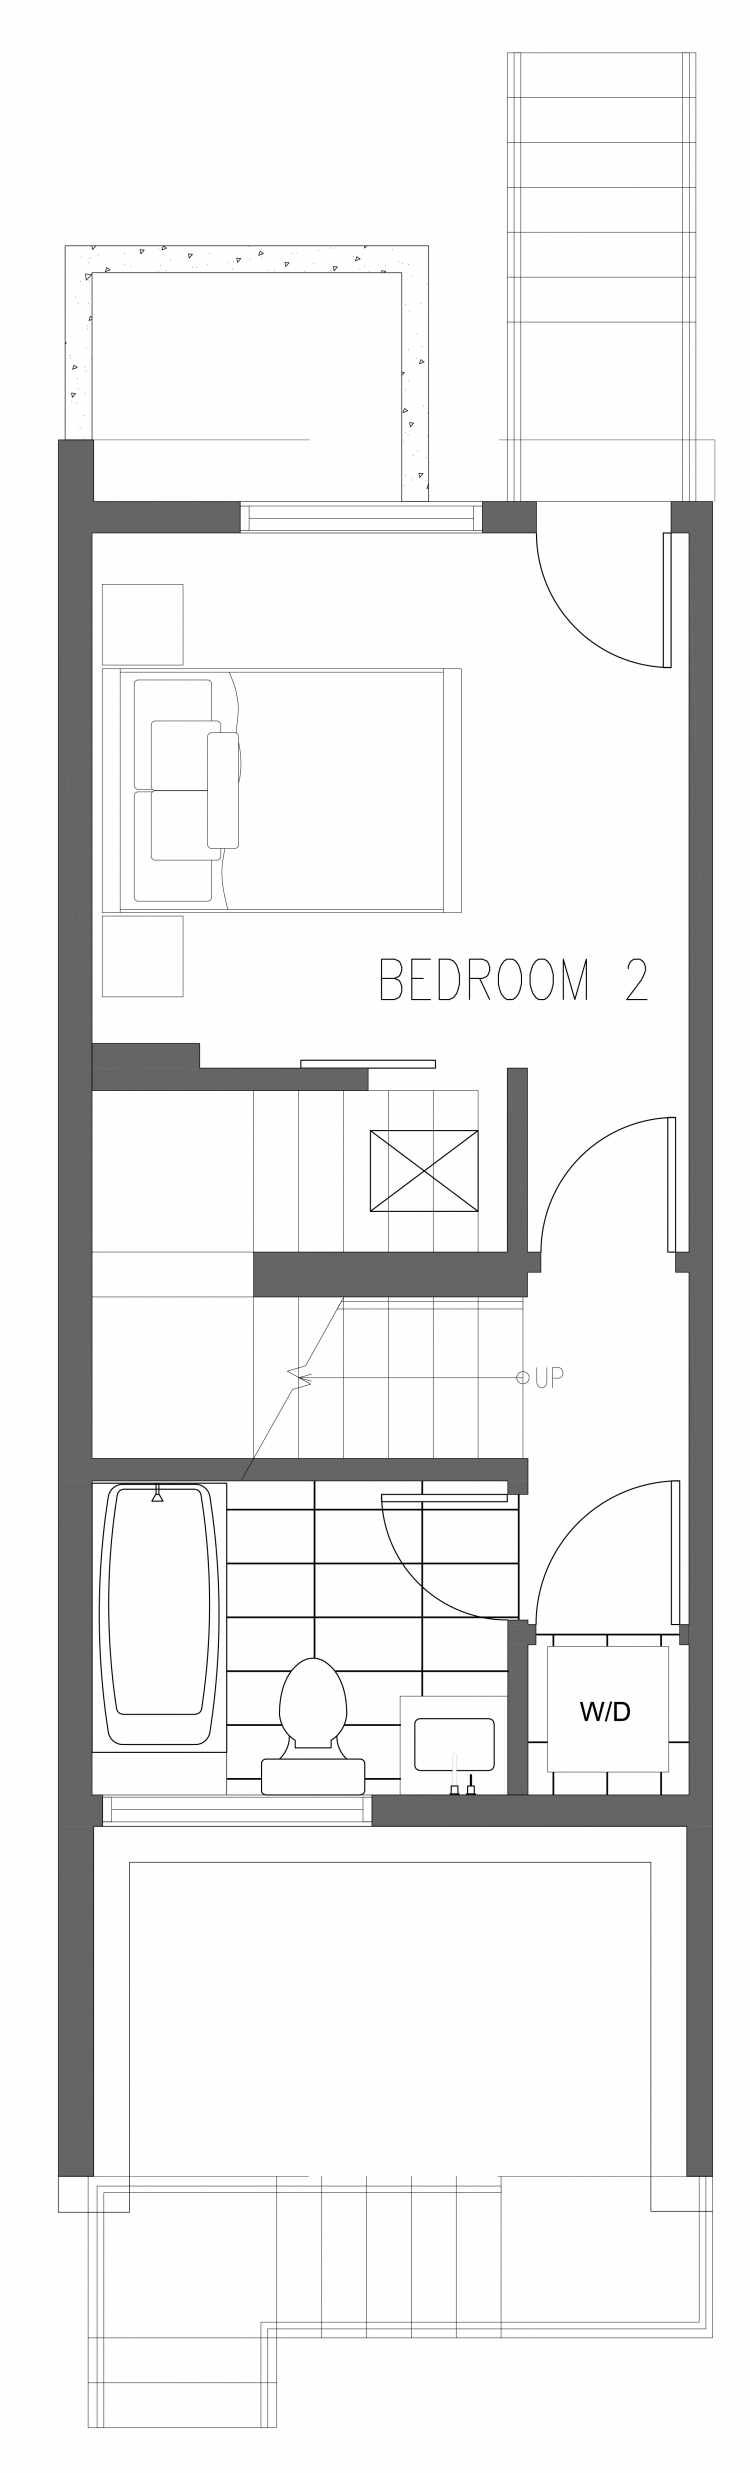 First Floor Plan of 2357 Beacon Ave S, One of the Brea Townhomes in North Beacon Hill